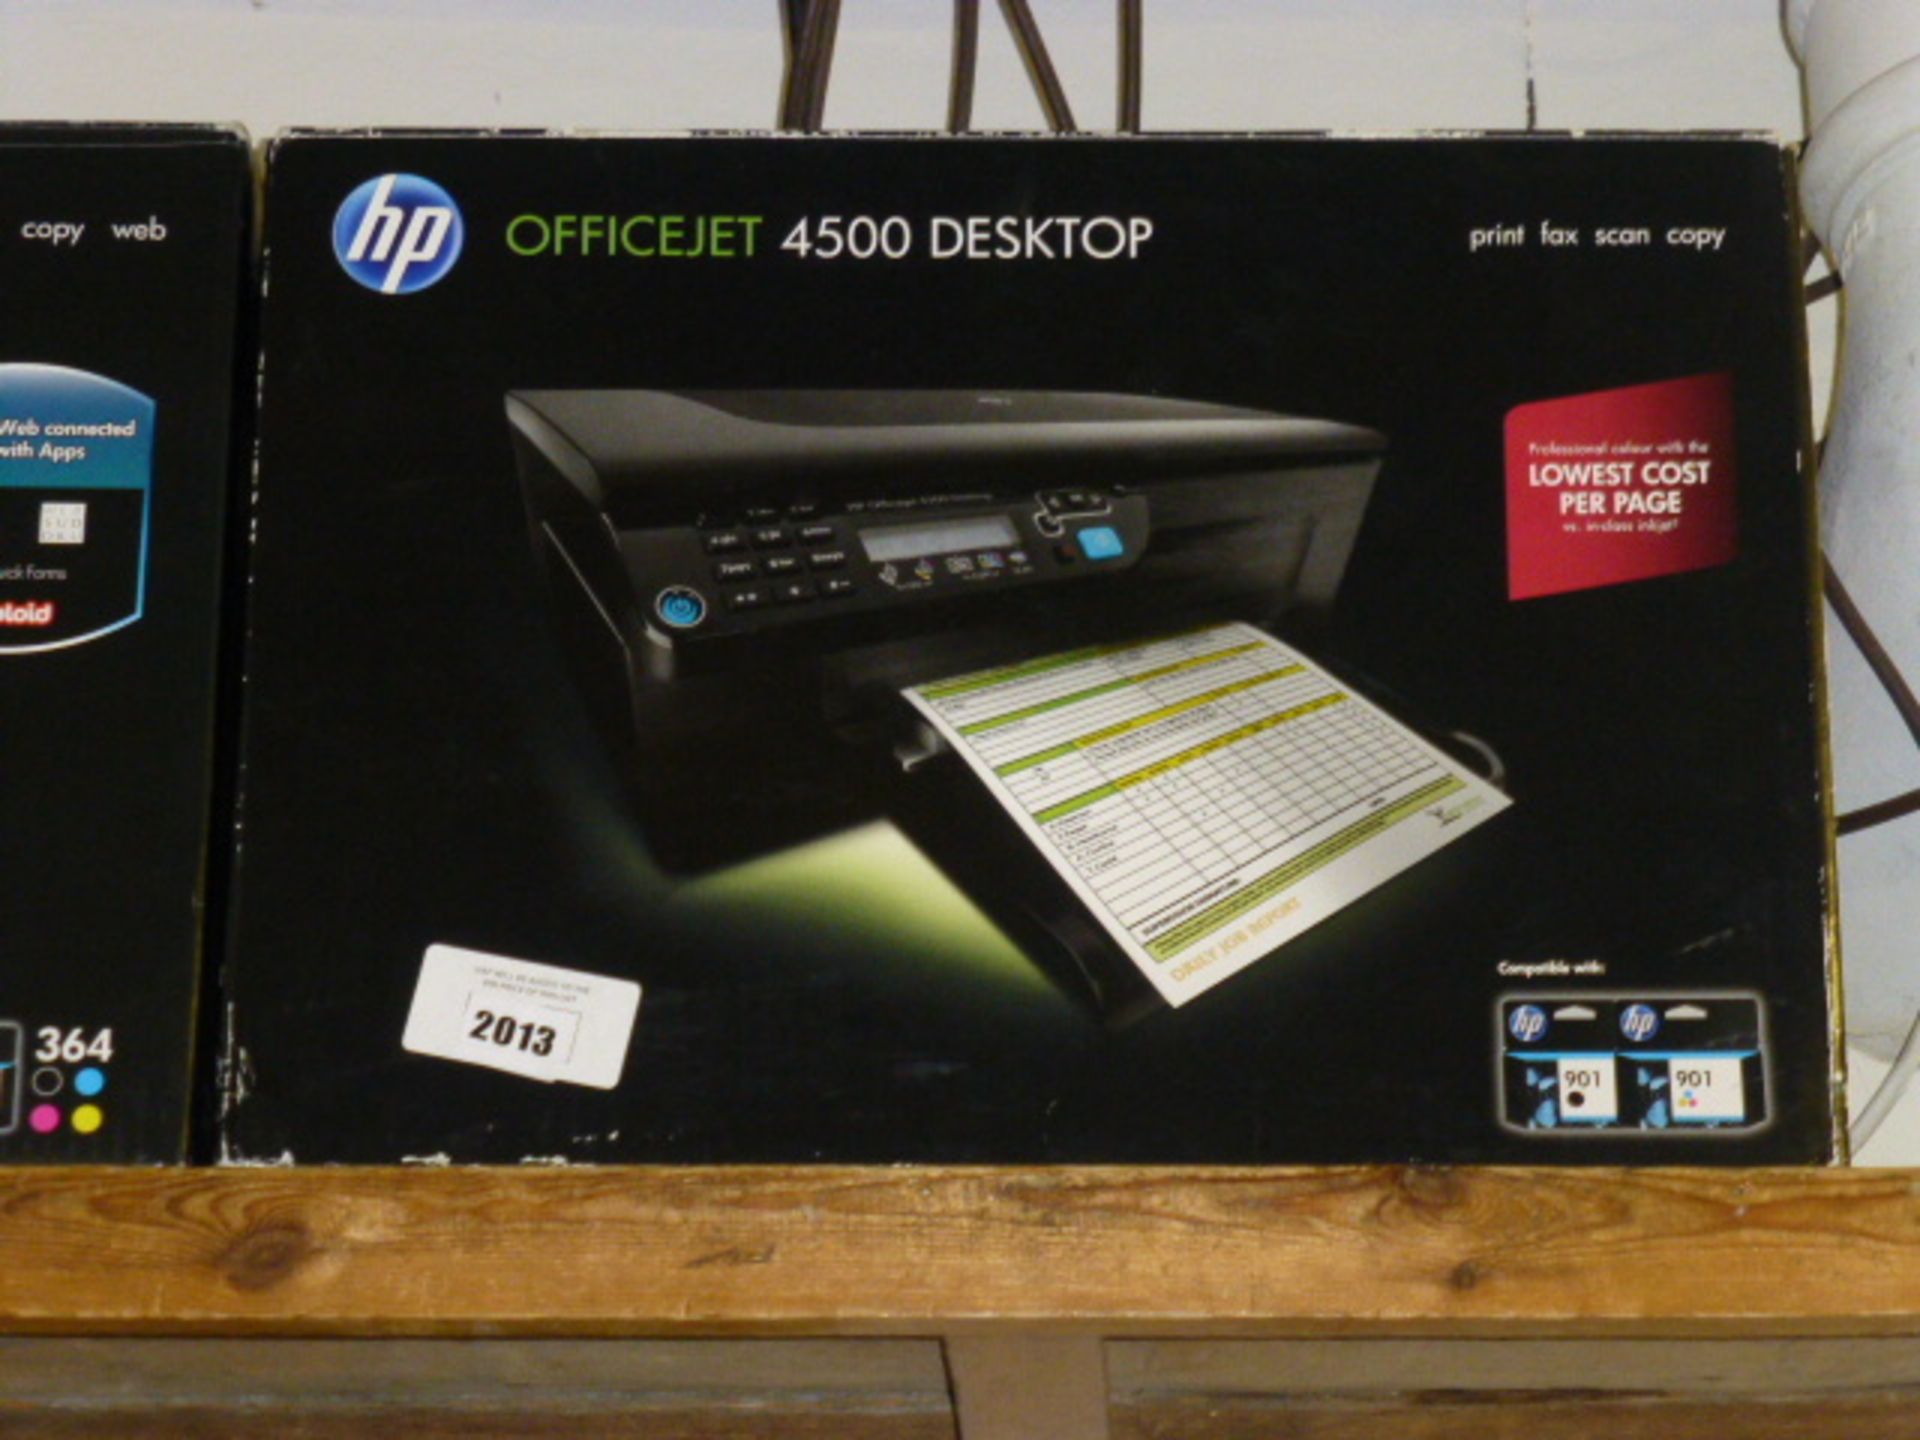 HP Officejet 4500 all in one printer in a box